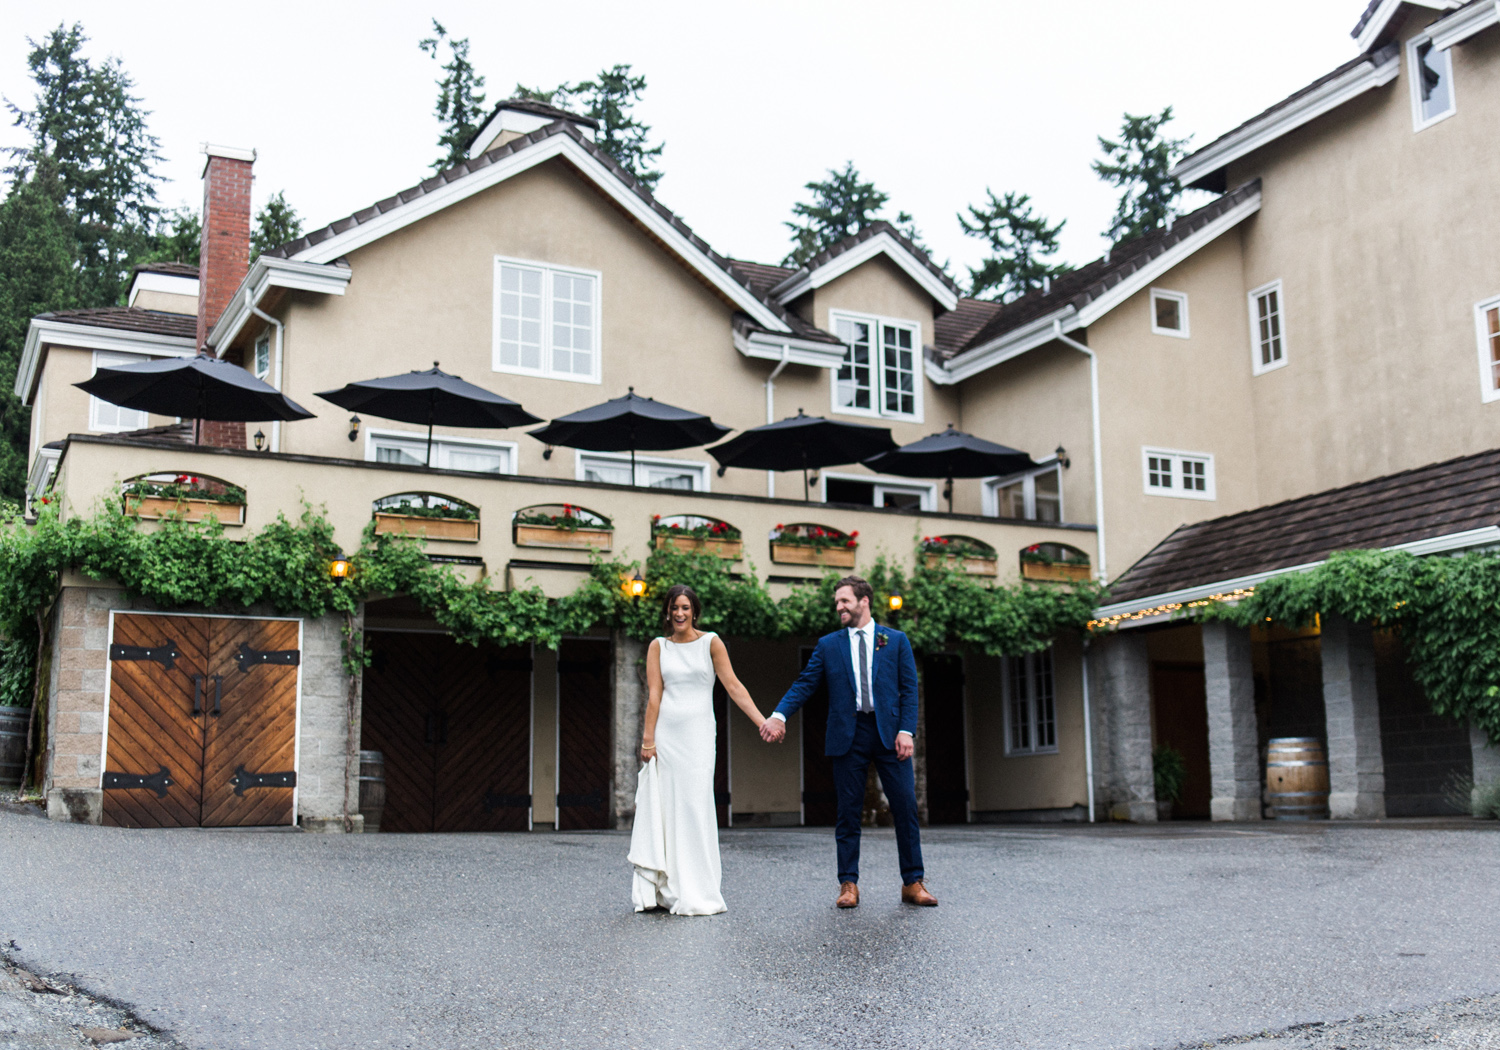 delille cellars woodinville winery wedding venue bride and groom portrait photography.jpg